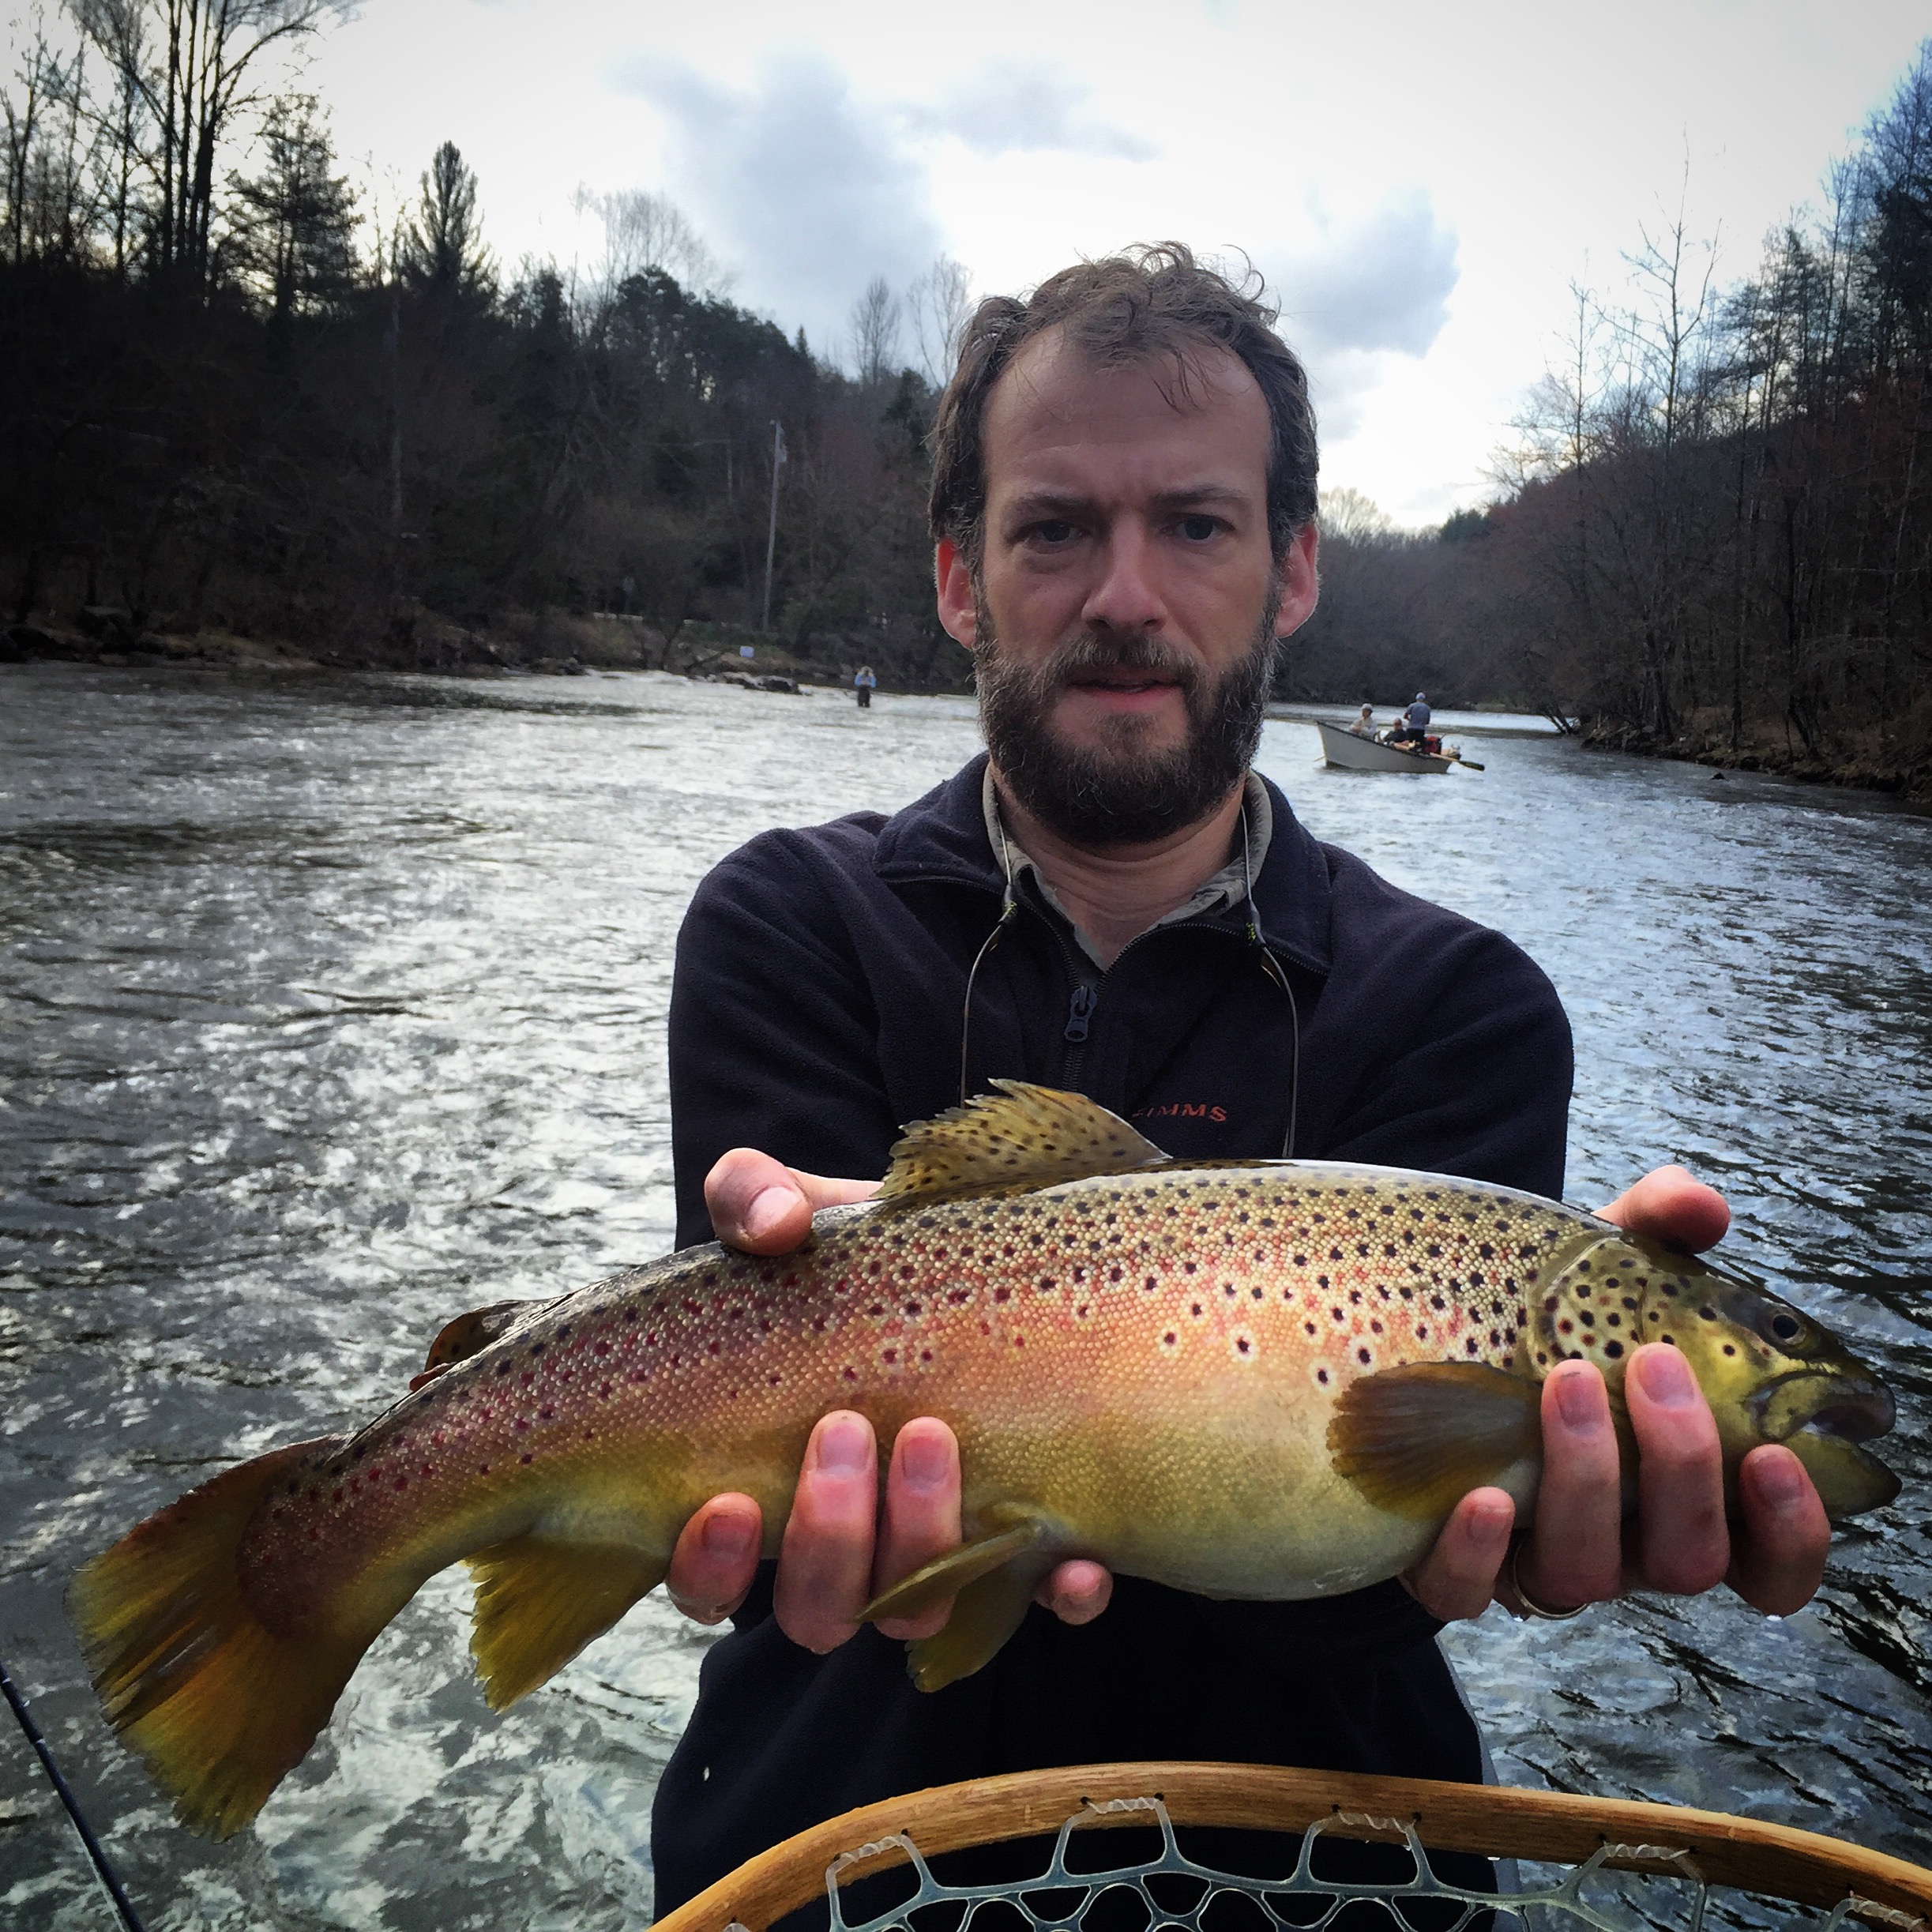 Guided Fly Fishing in Cherokee NC  Hookers Fly Shop and Guide Service.  Your Smokies Fly Fishing Experience.